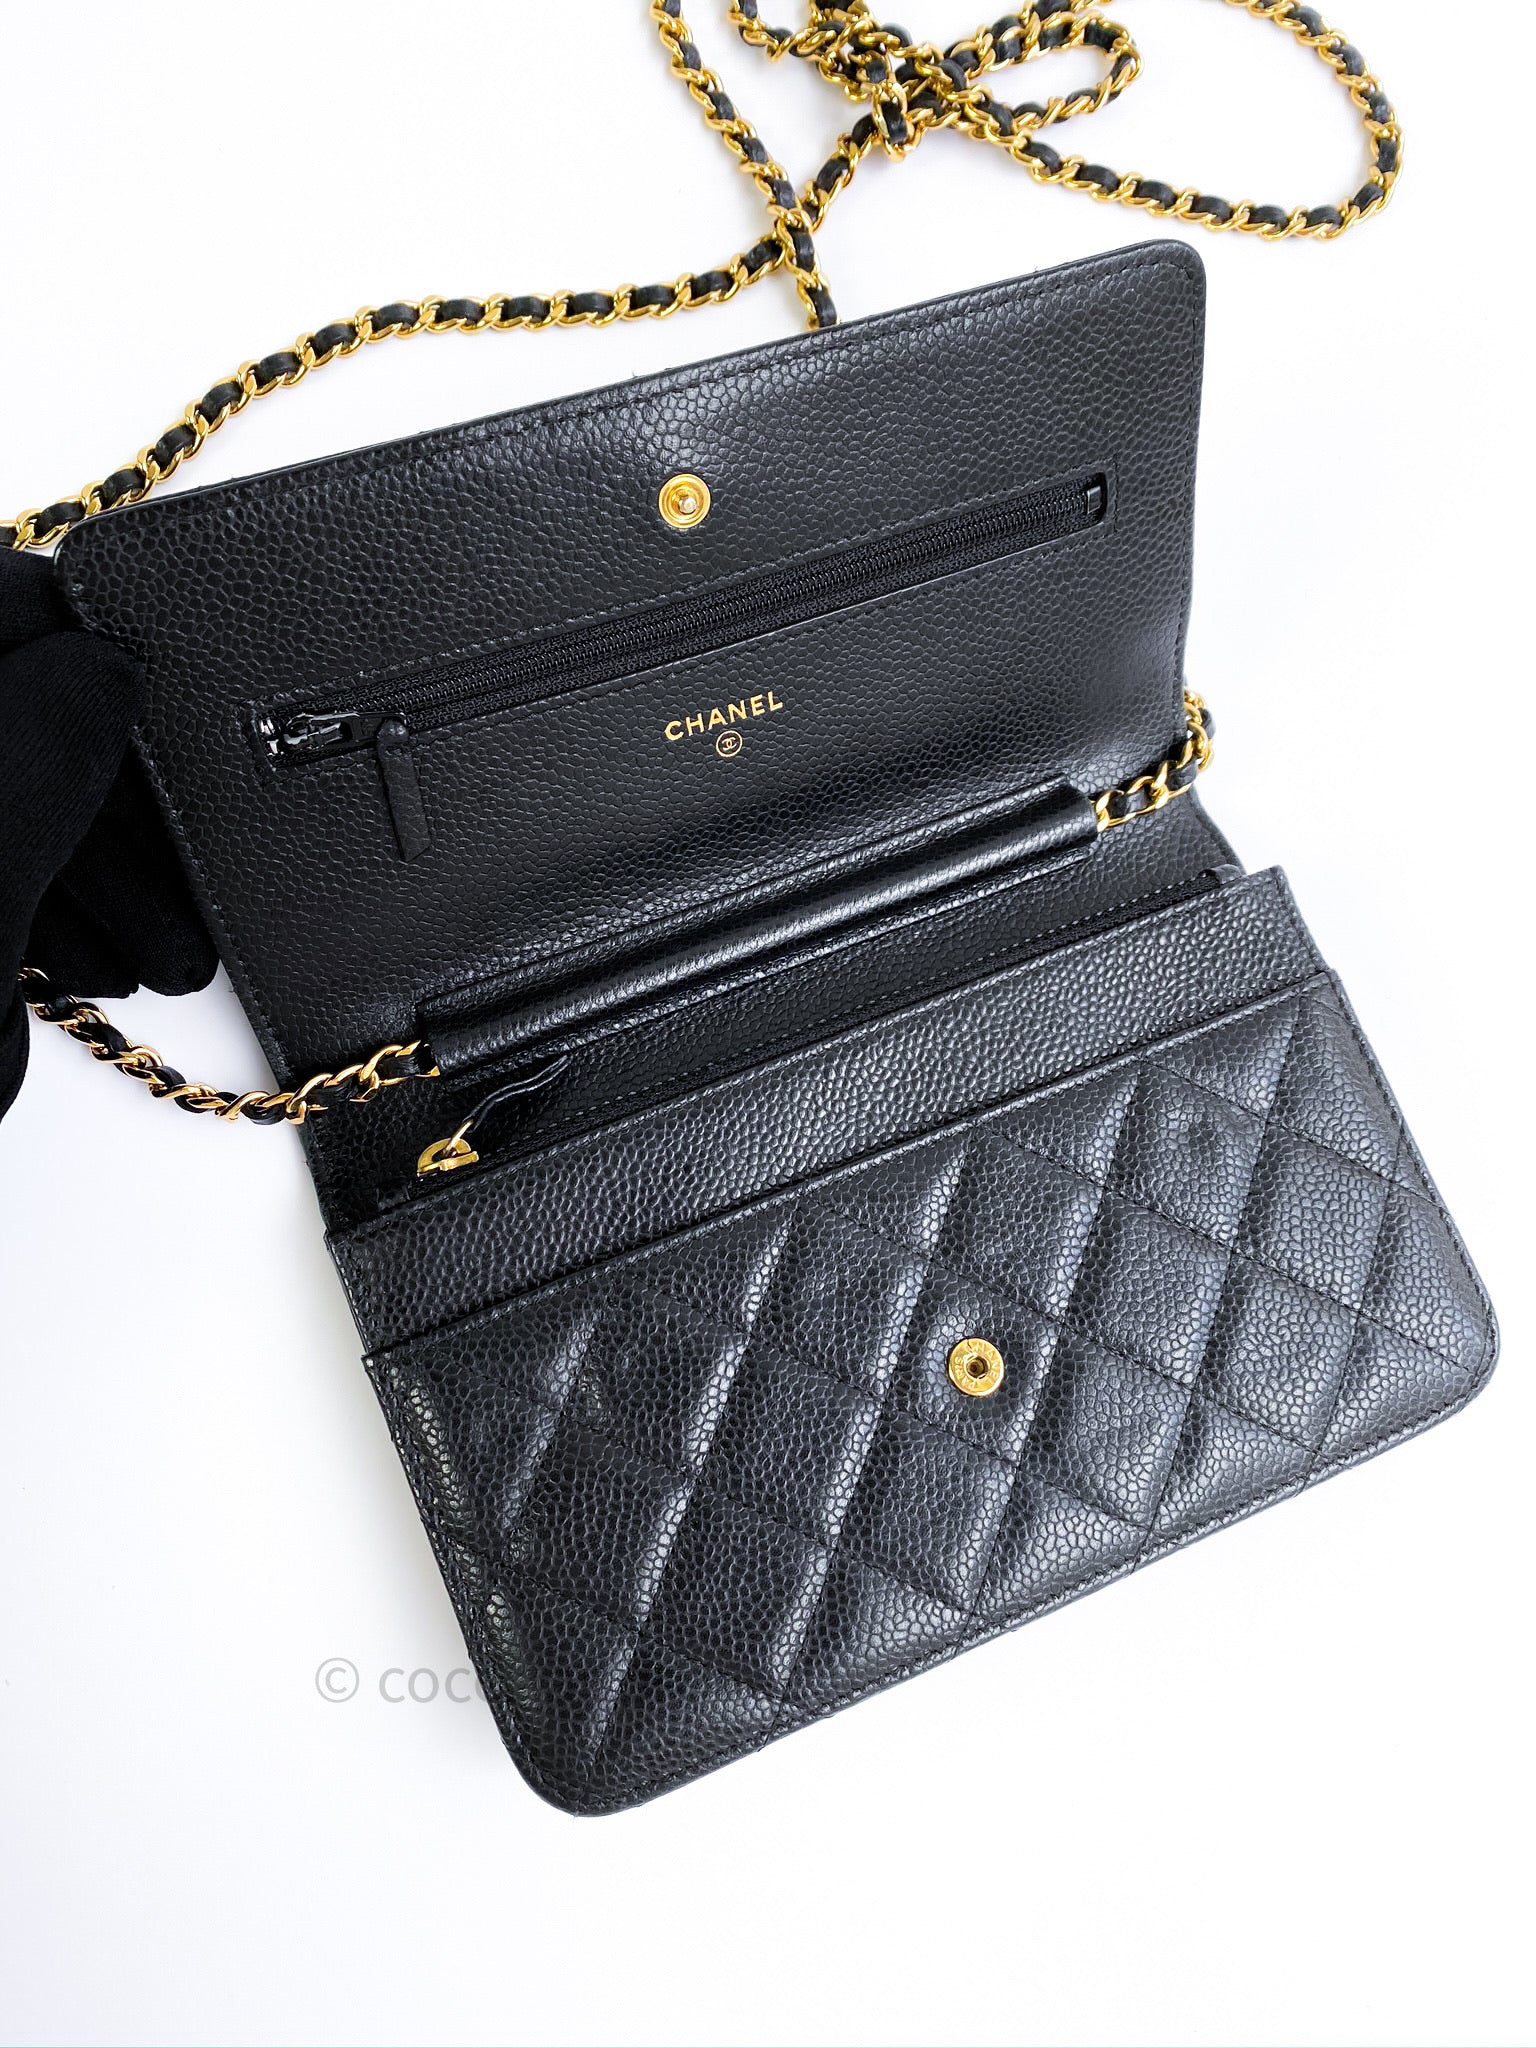 Chanel WOC Wallet on Chain in Black Lambskin with Gold Hardware - SOLD